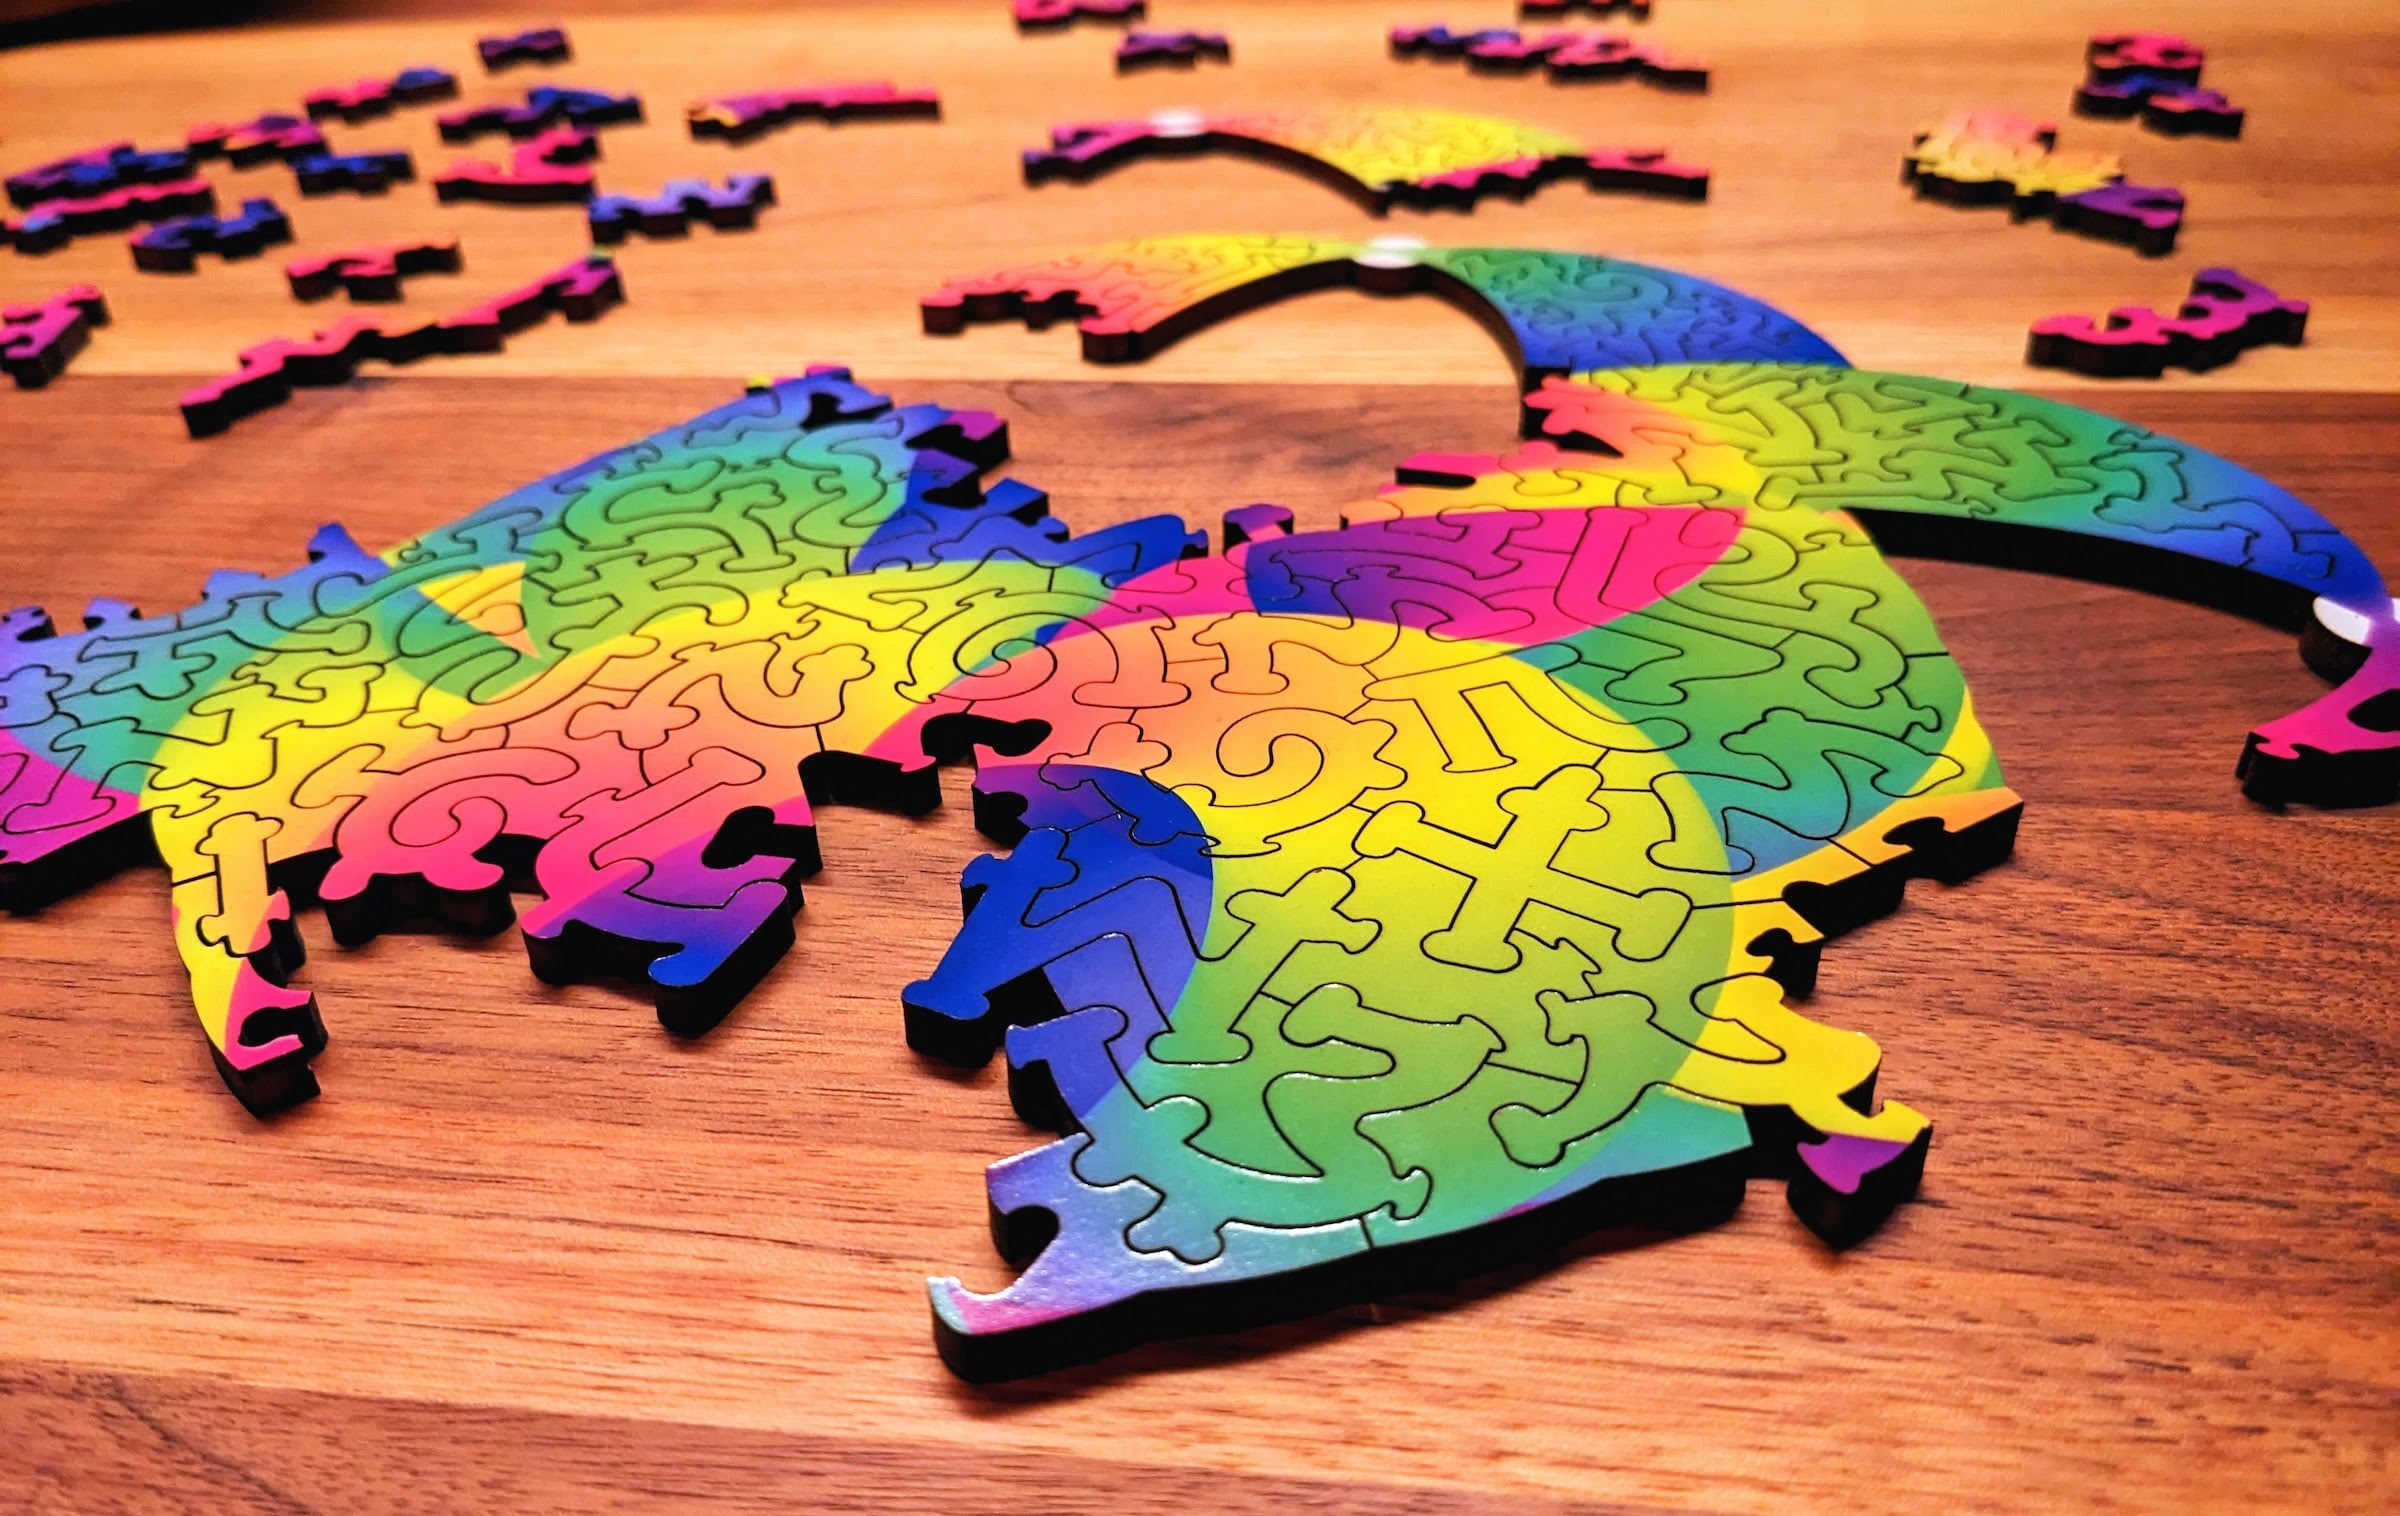 Putting together the Coronium jigsaw puzzle